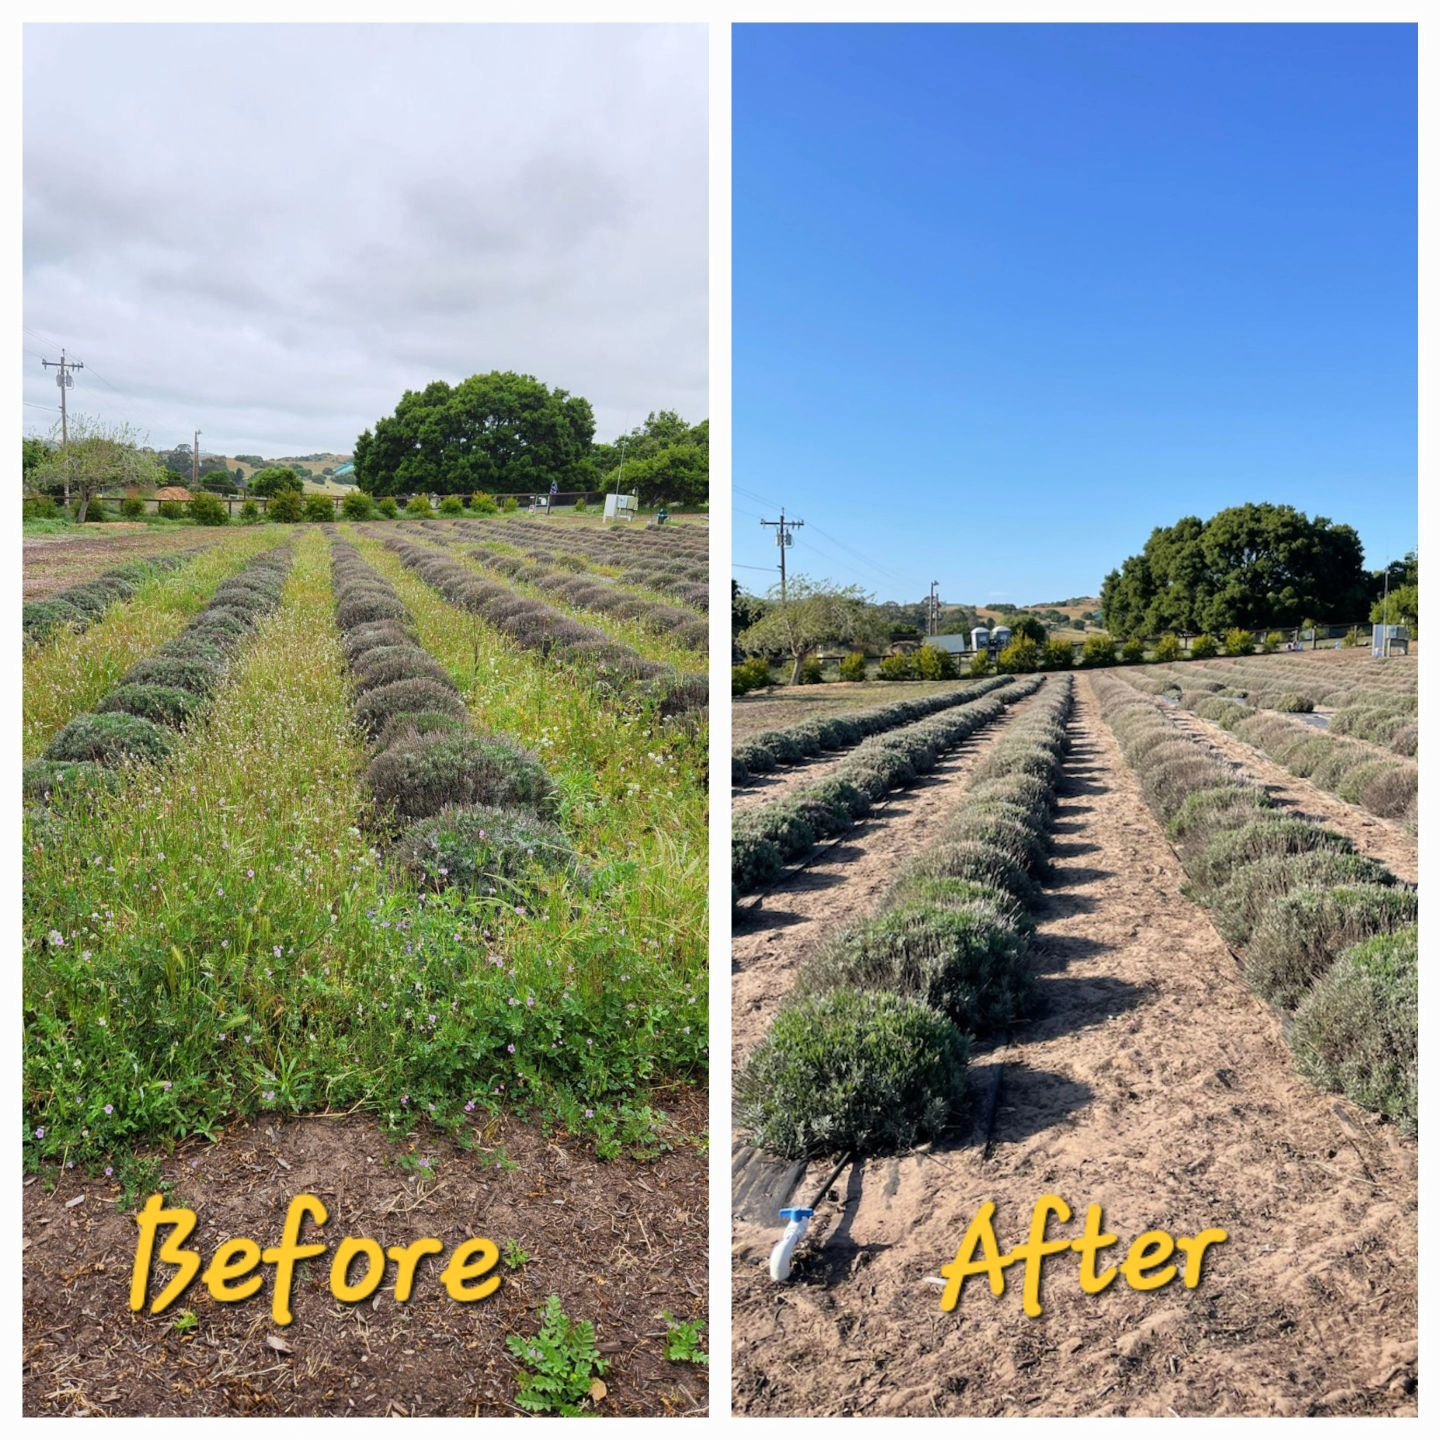 Are you curious what the lavender field looks like at the end of a very wet winter? Way too many weeds for 2 sheep🐑🐑 Here is the before &amp; after weeding the field. I feel so much better now that the weeds are gone. #lavenderfarming #lavenderfiel